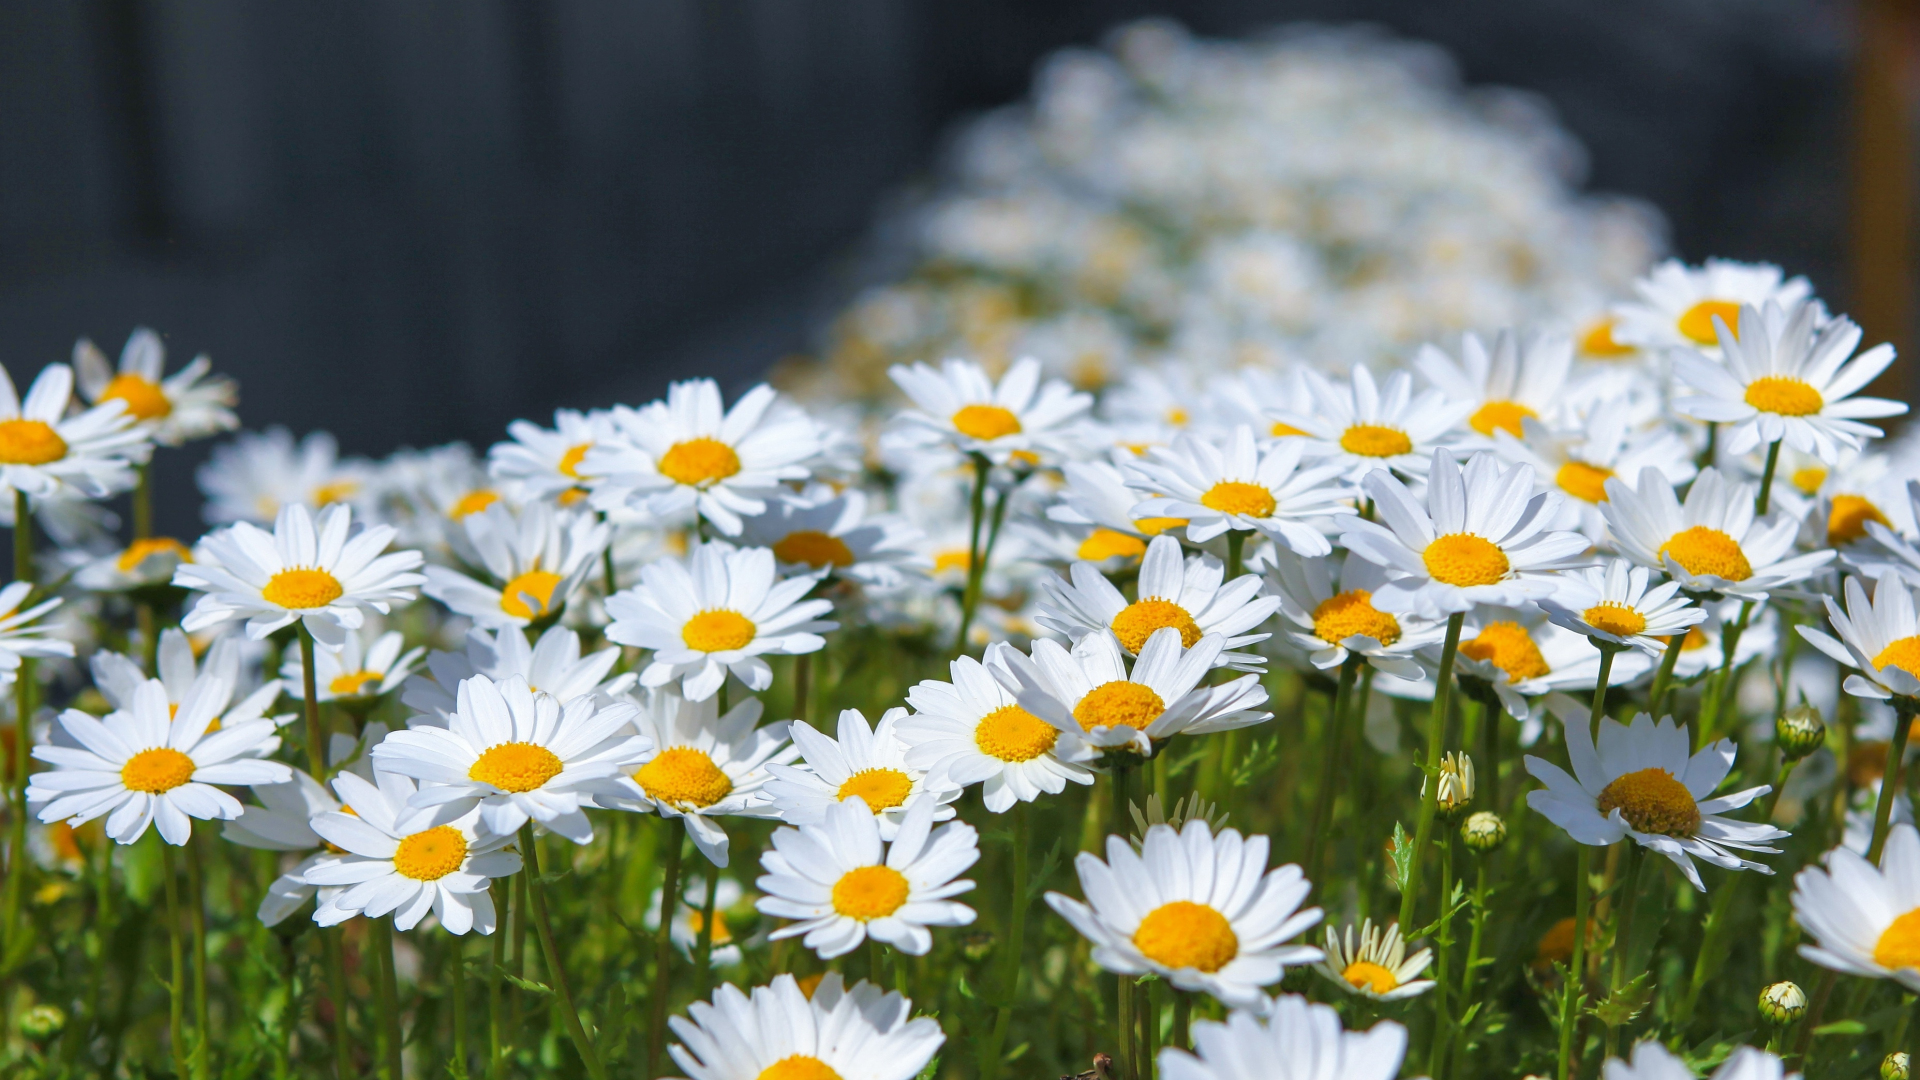 Meadow, spring, flowers, white daisy, 1920x1080 wallpaper